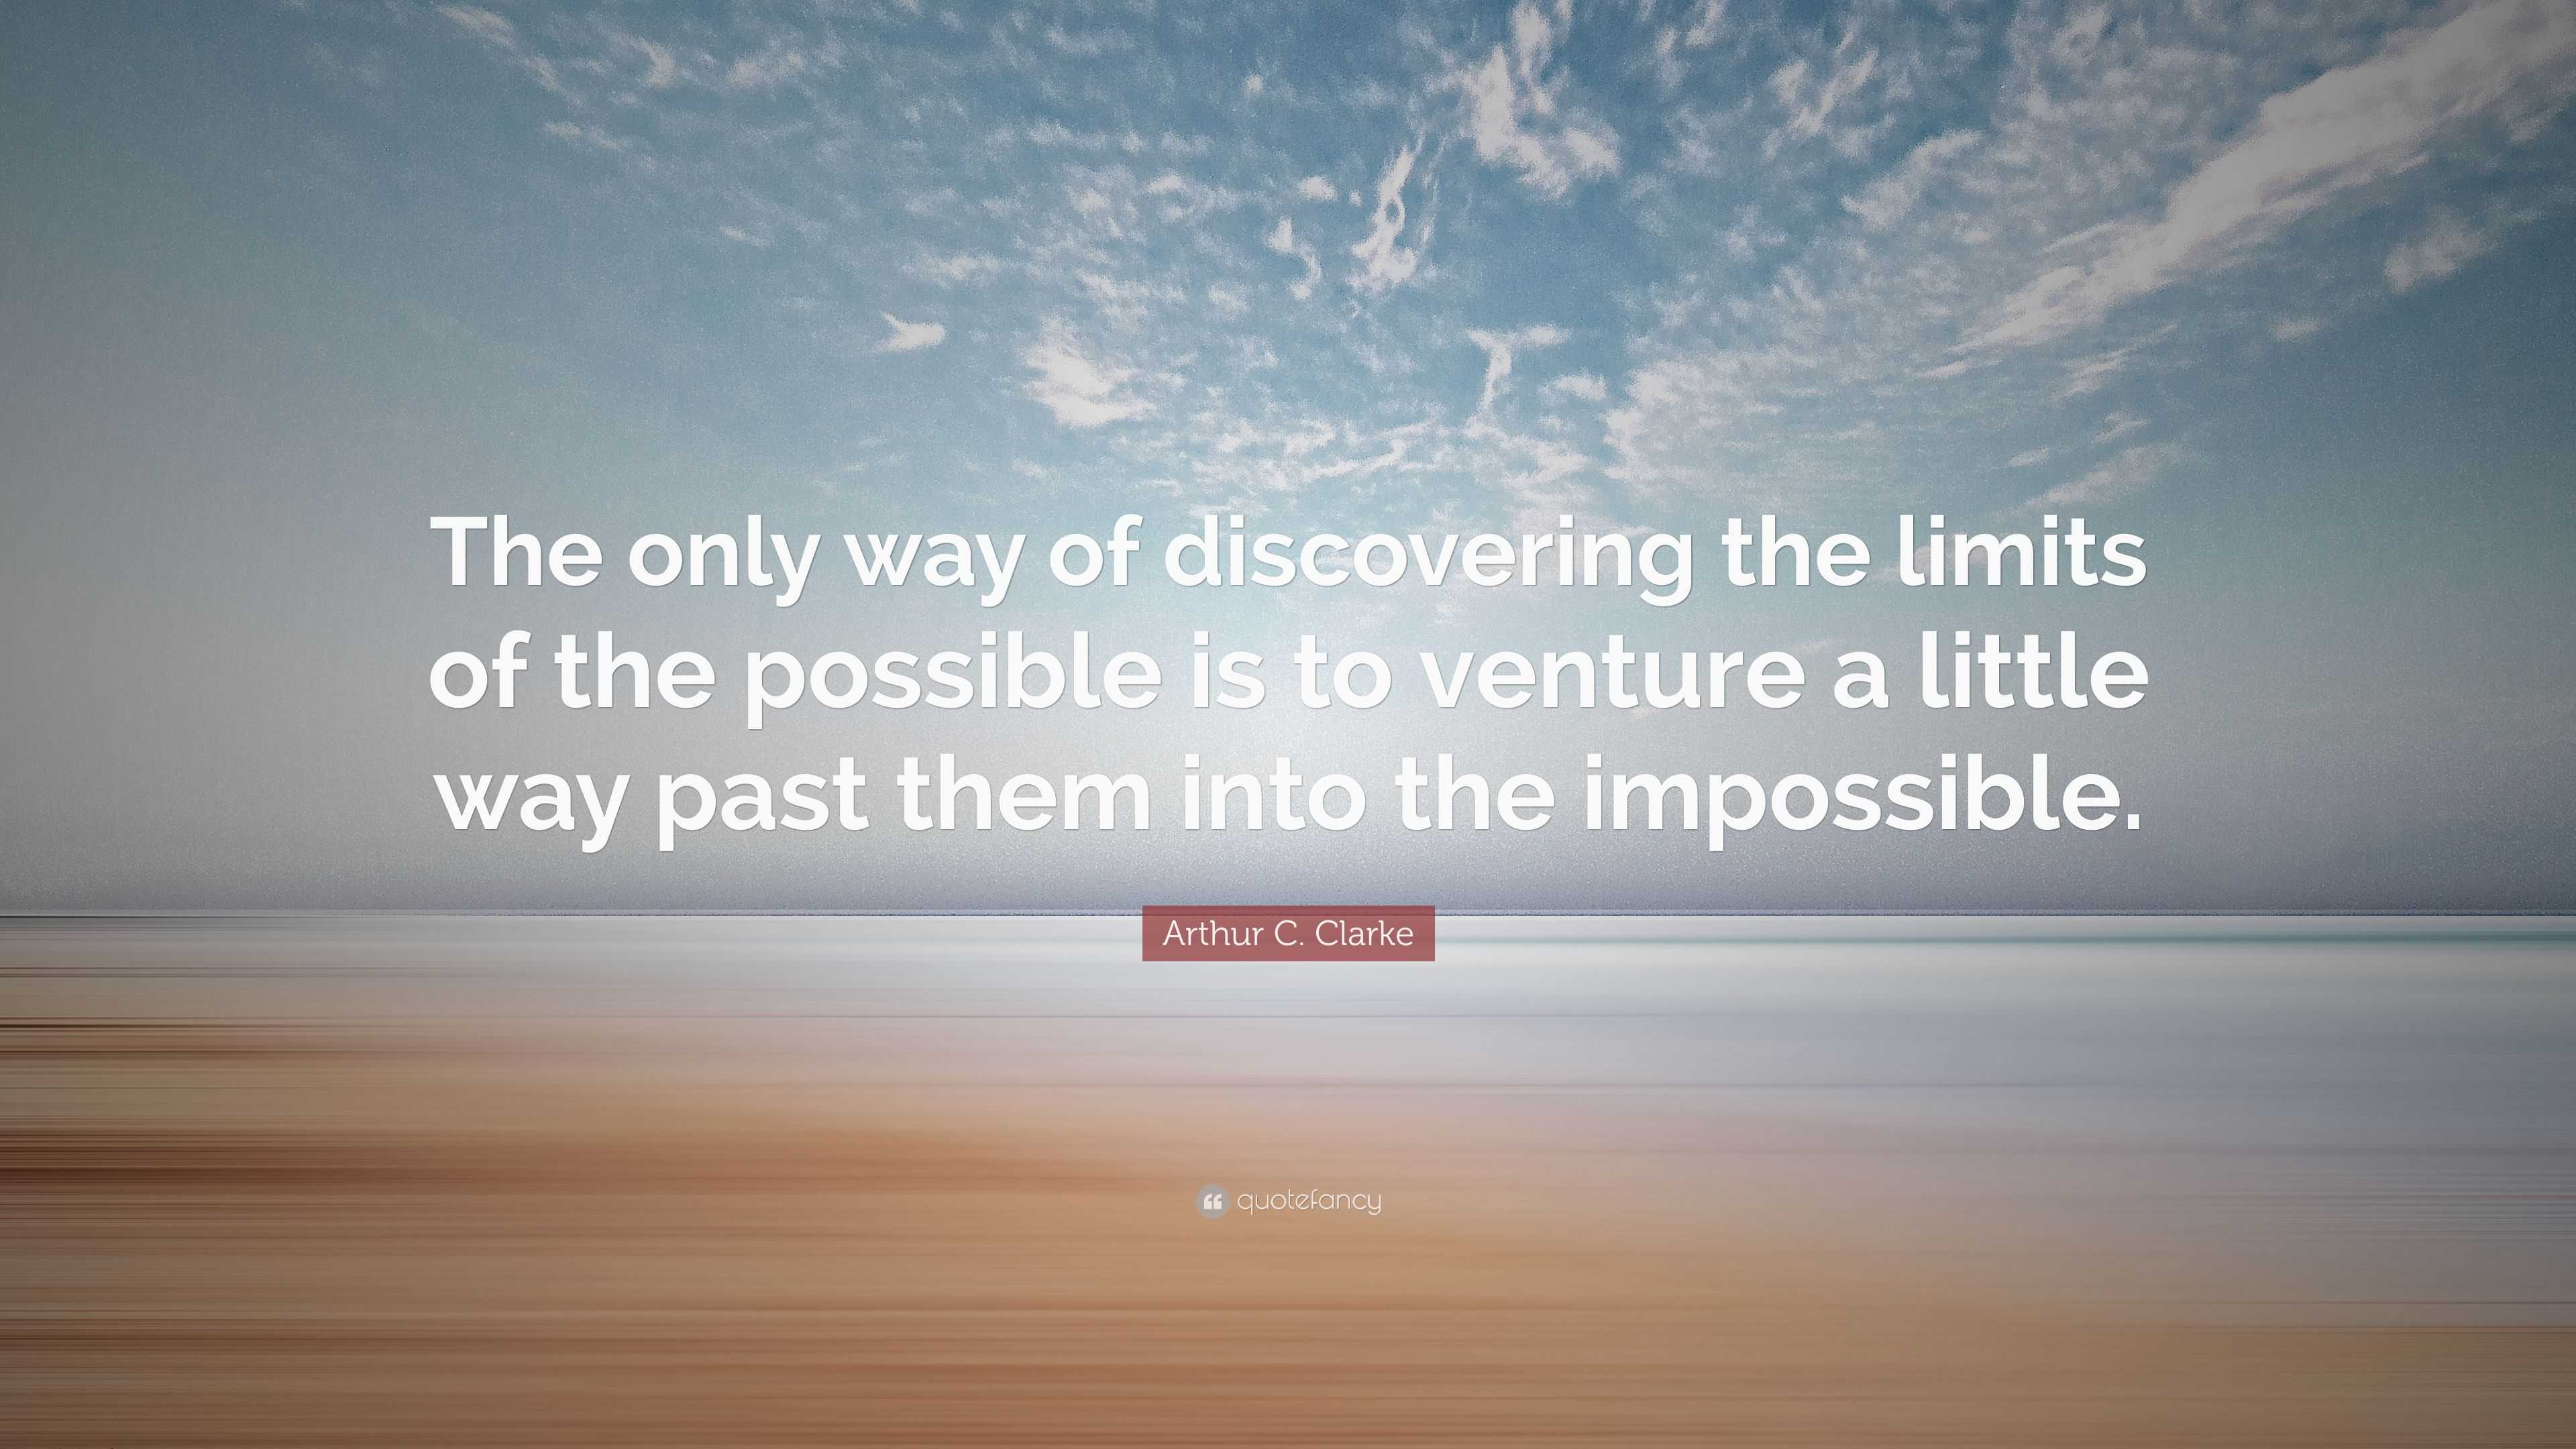 Arthur C. Clarke Quote: “The only way of discovering the limits of the ...